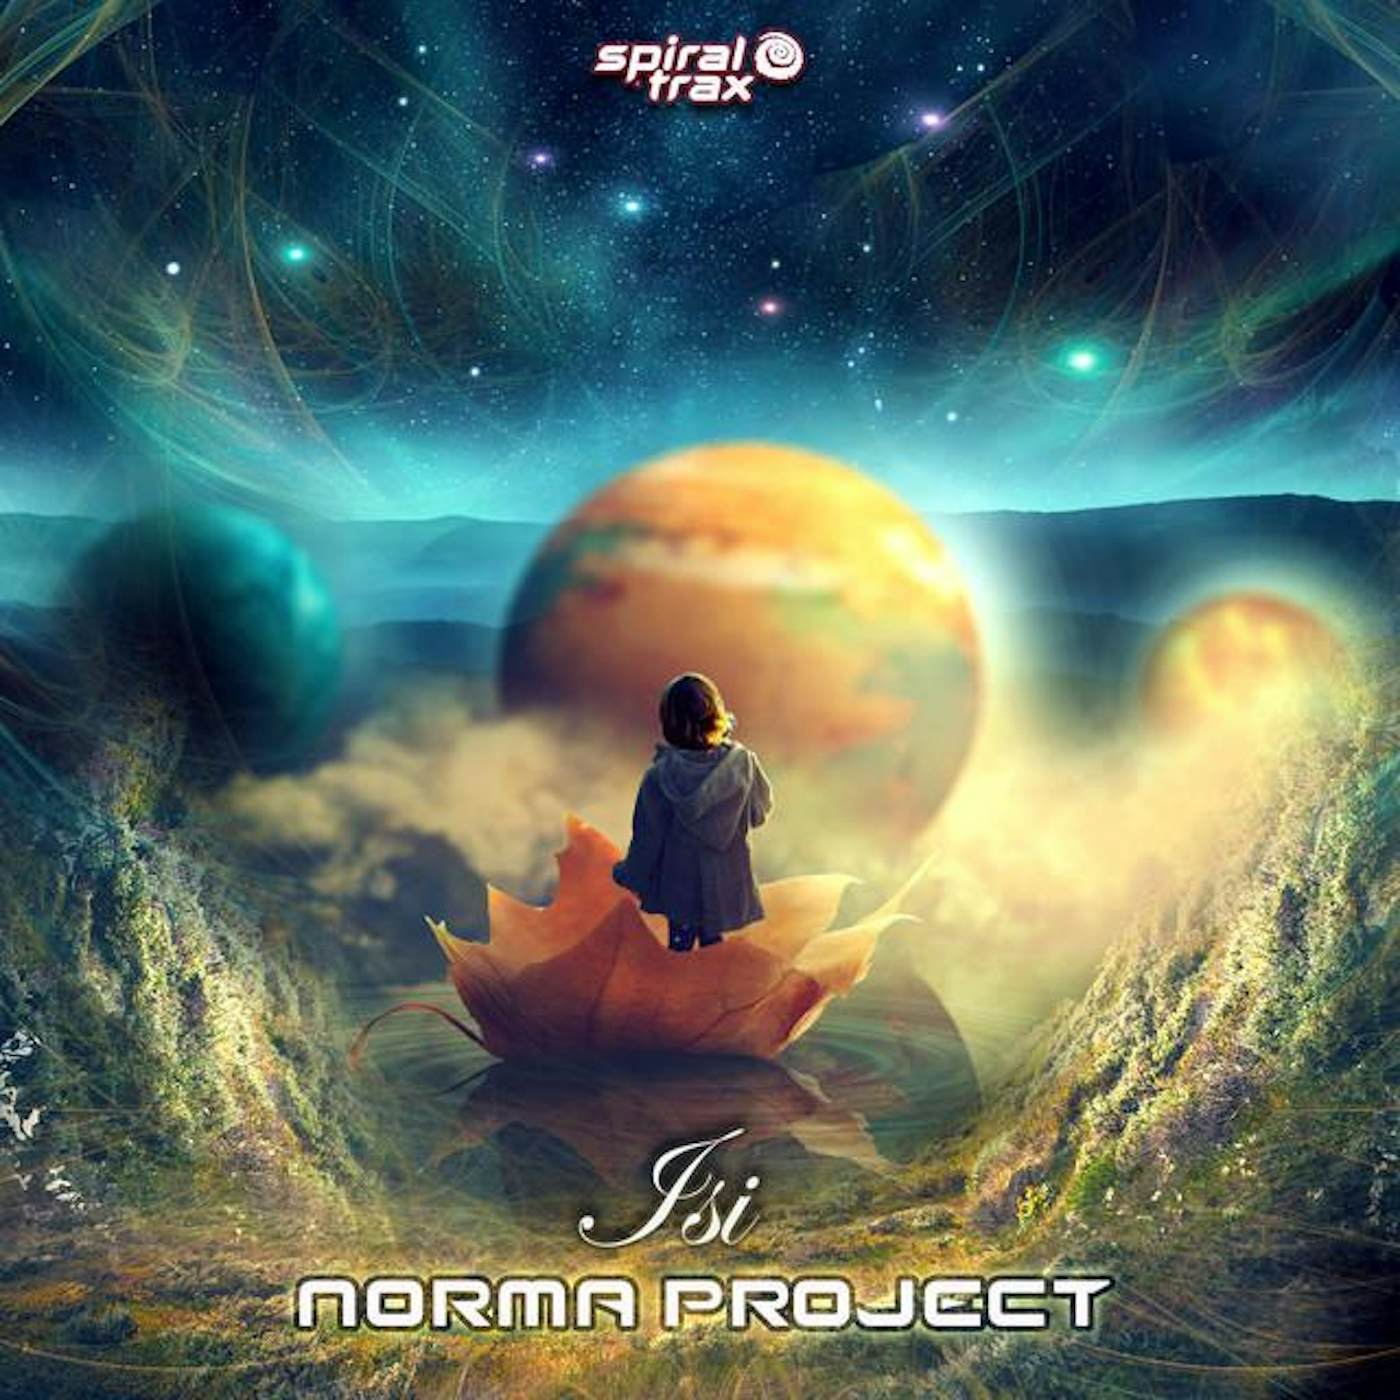 Norma Project